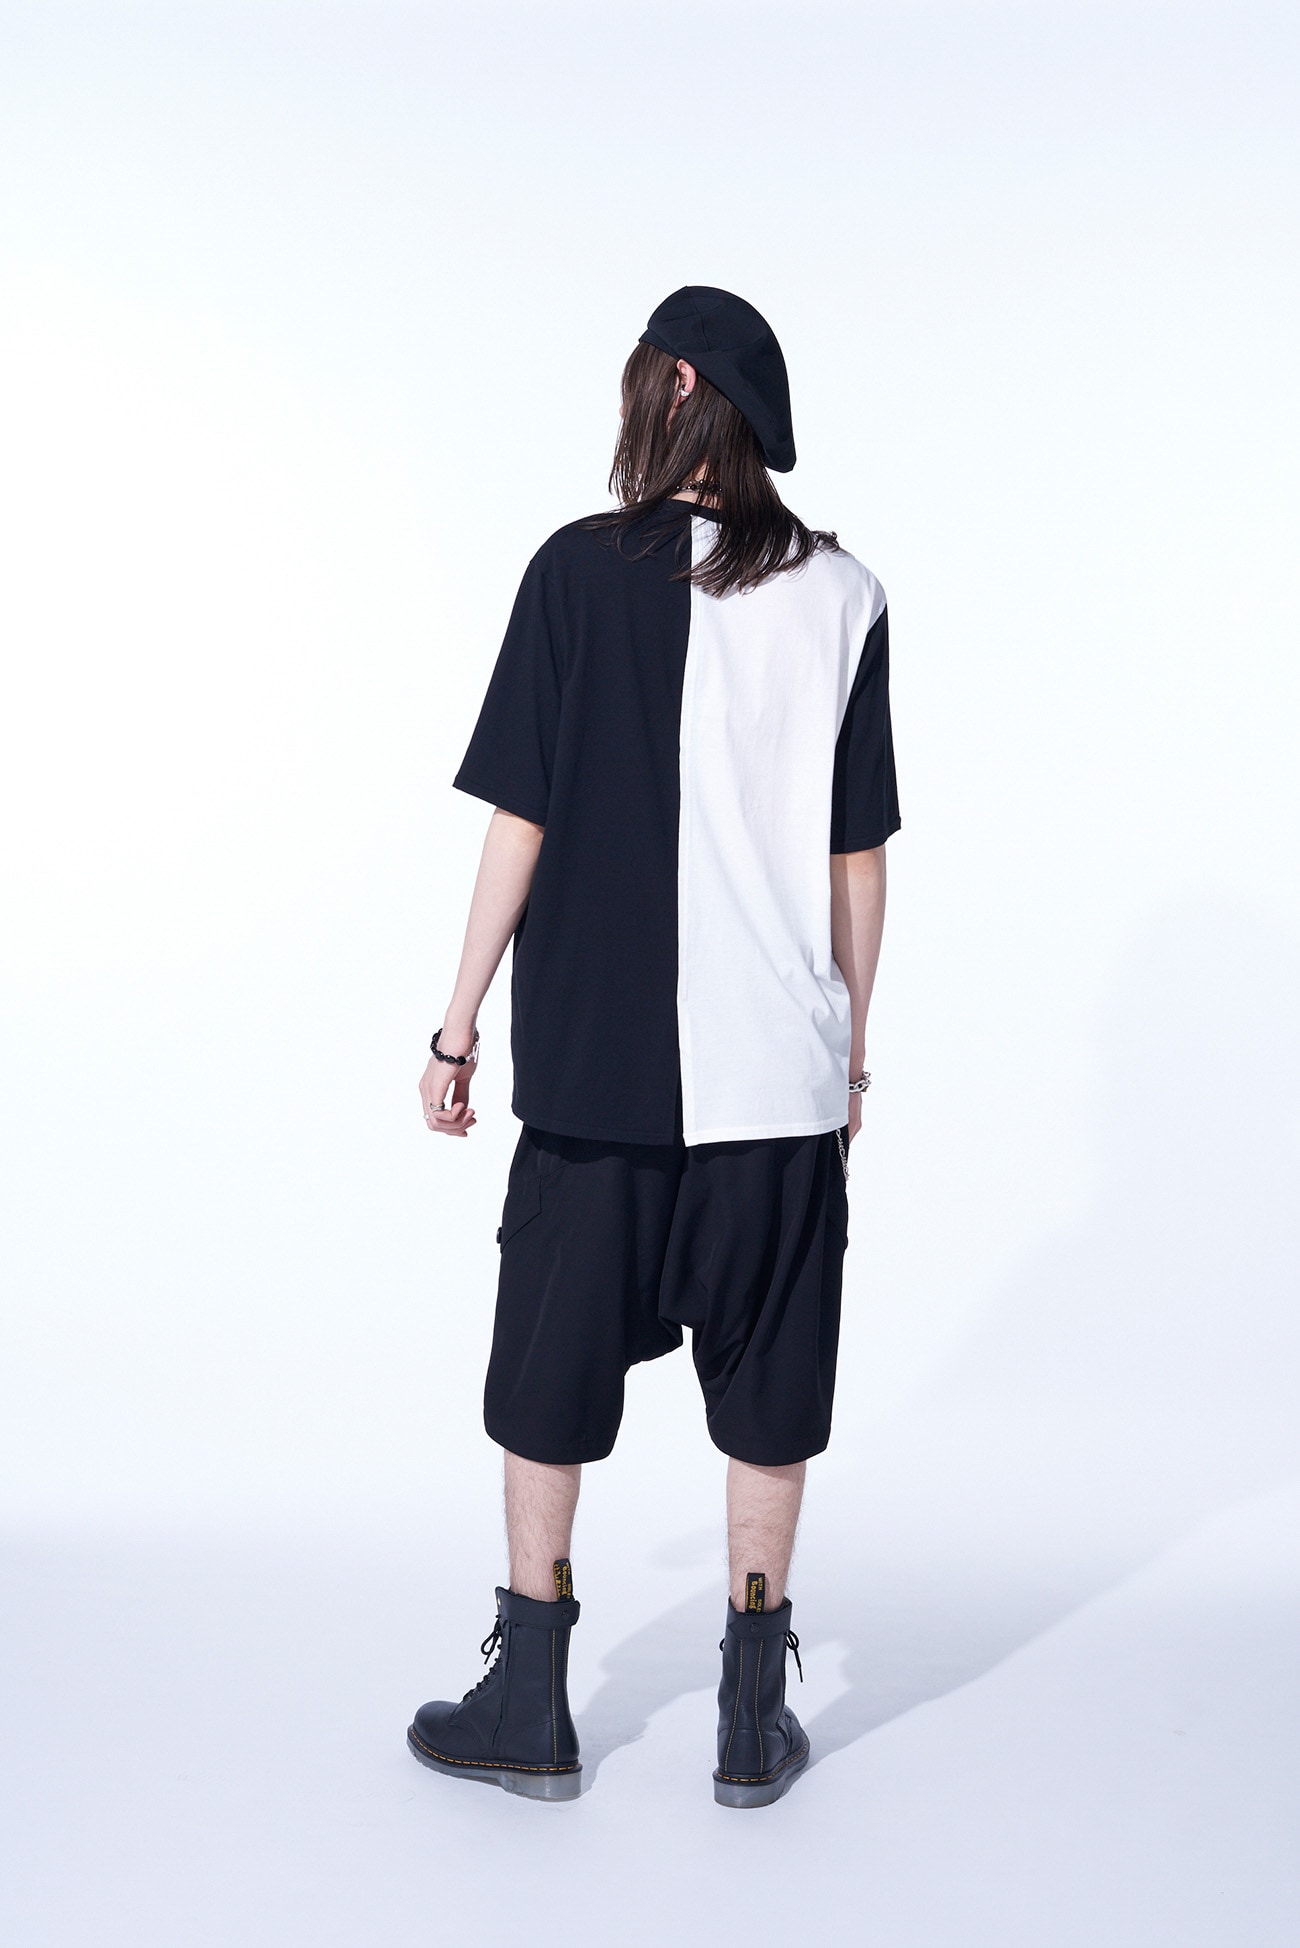 COLOR-SWITCHED ASYMMETRICAL DESIGN T-SHIRT